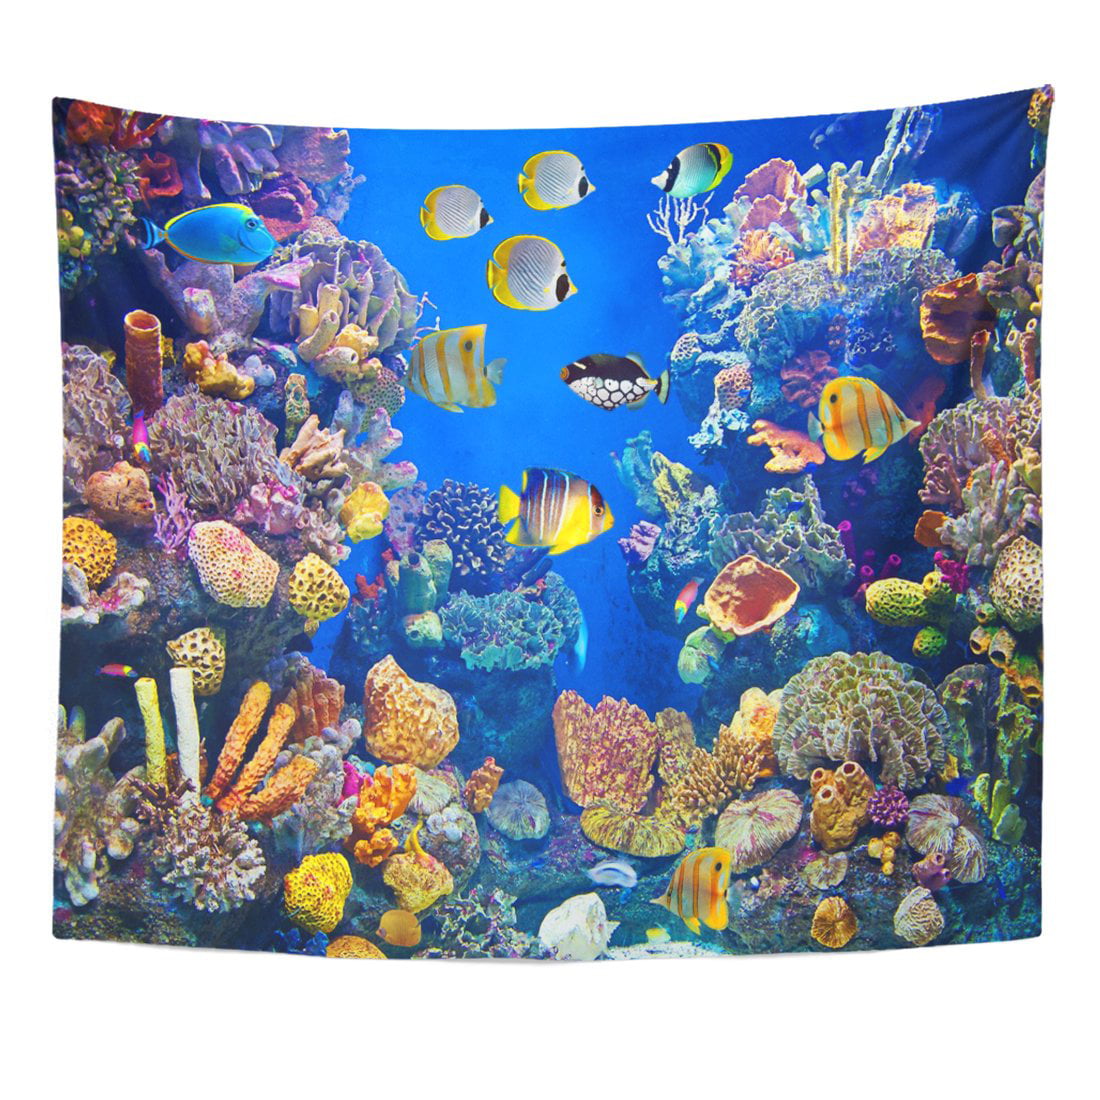 REFRED Fish Colorful Aquarium Showing Different Fishes Swimming Sea ...